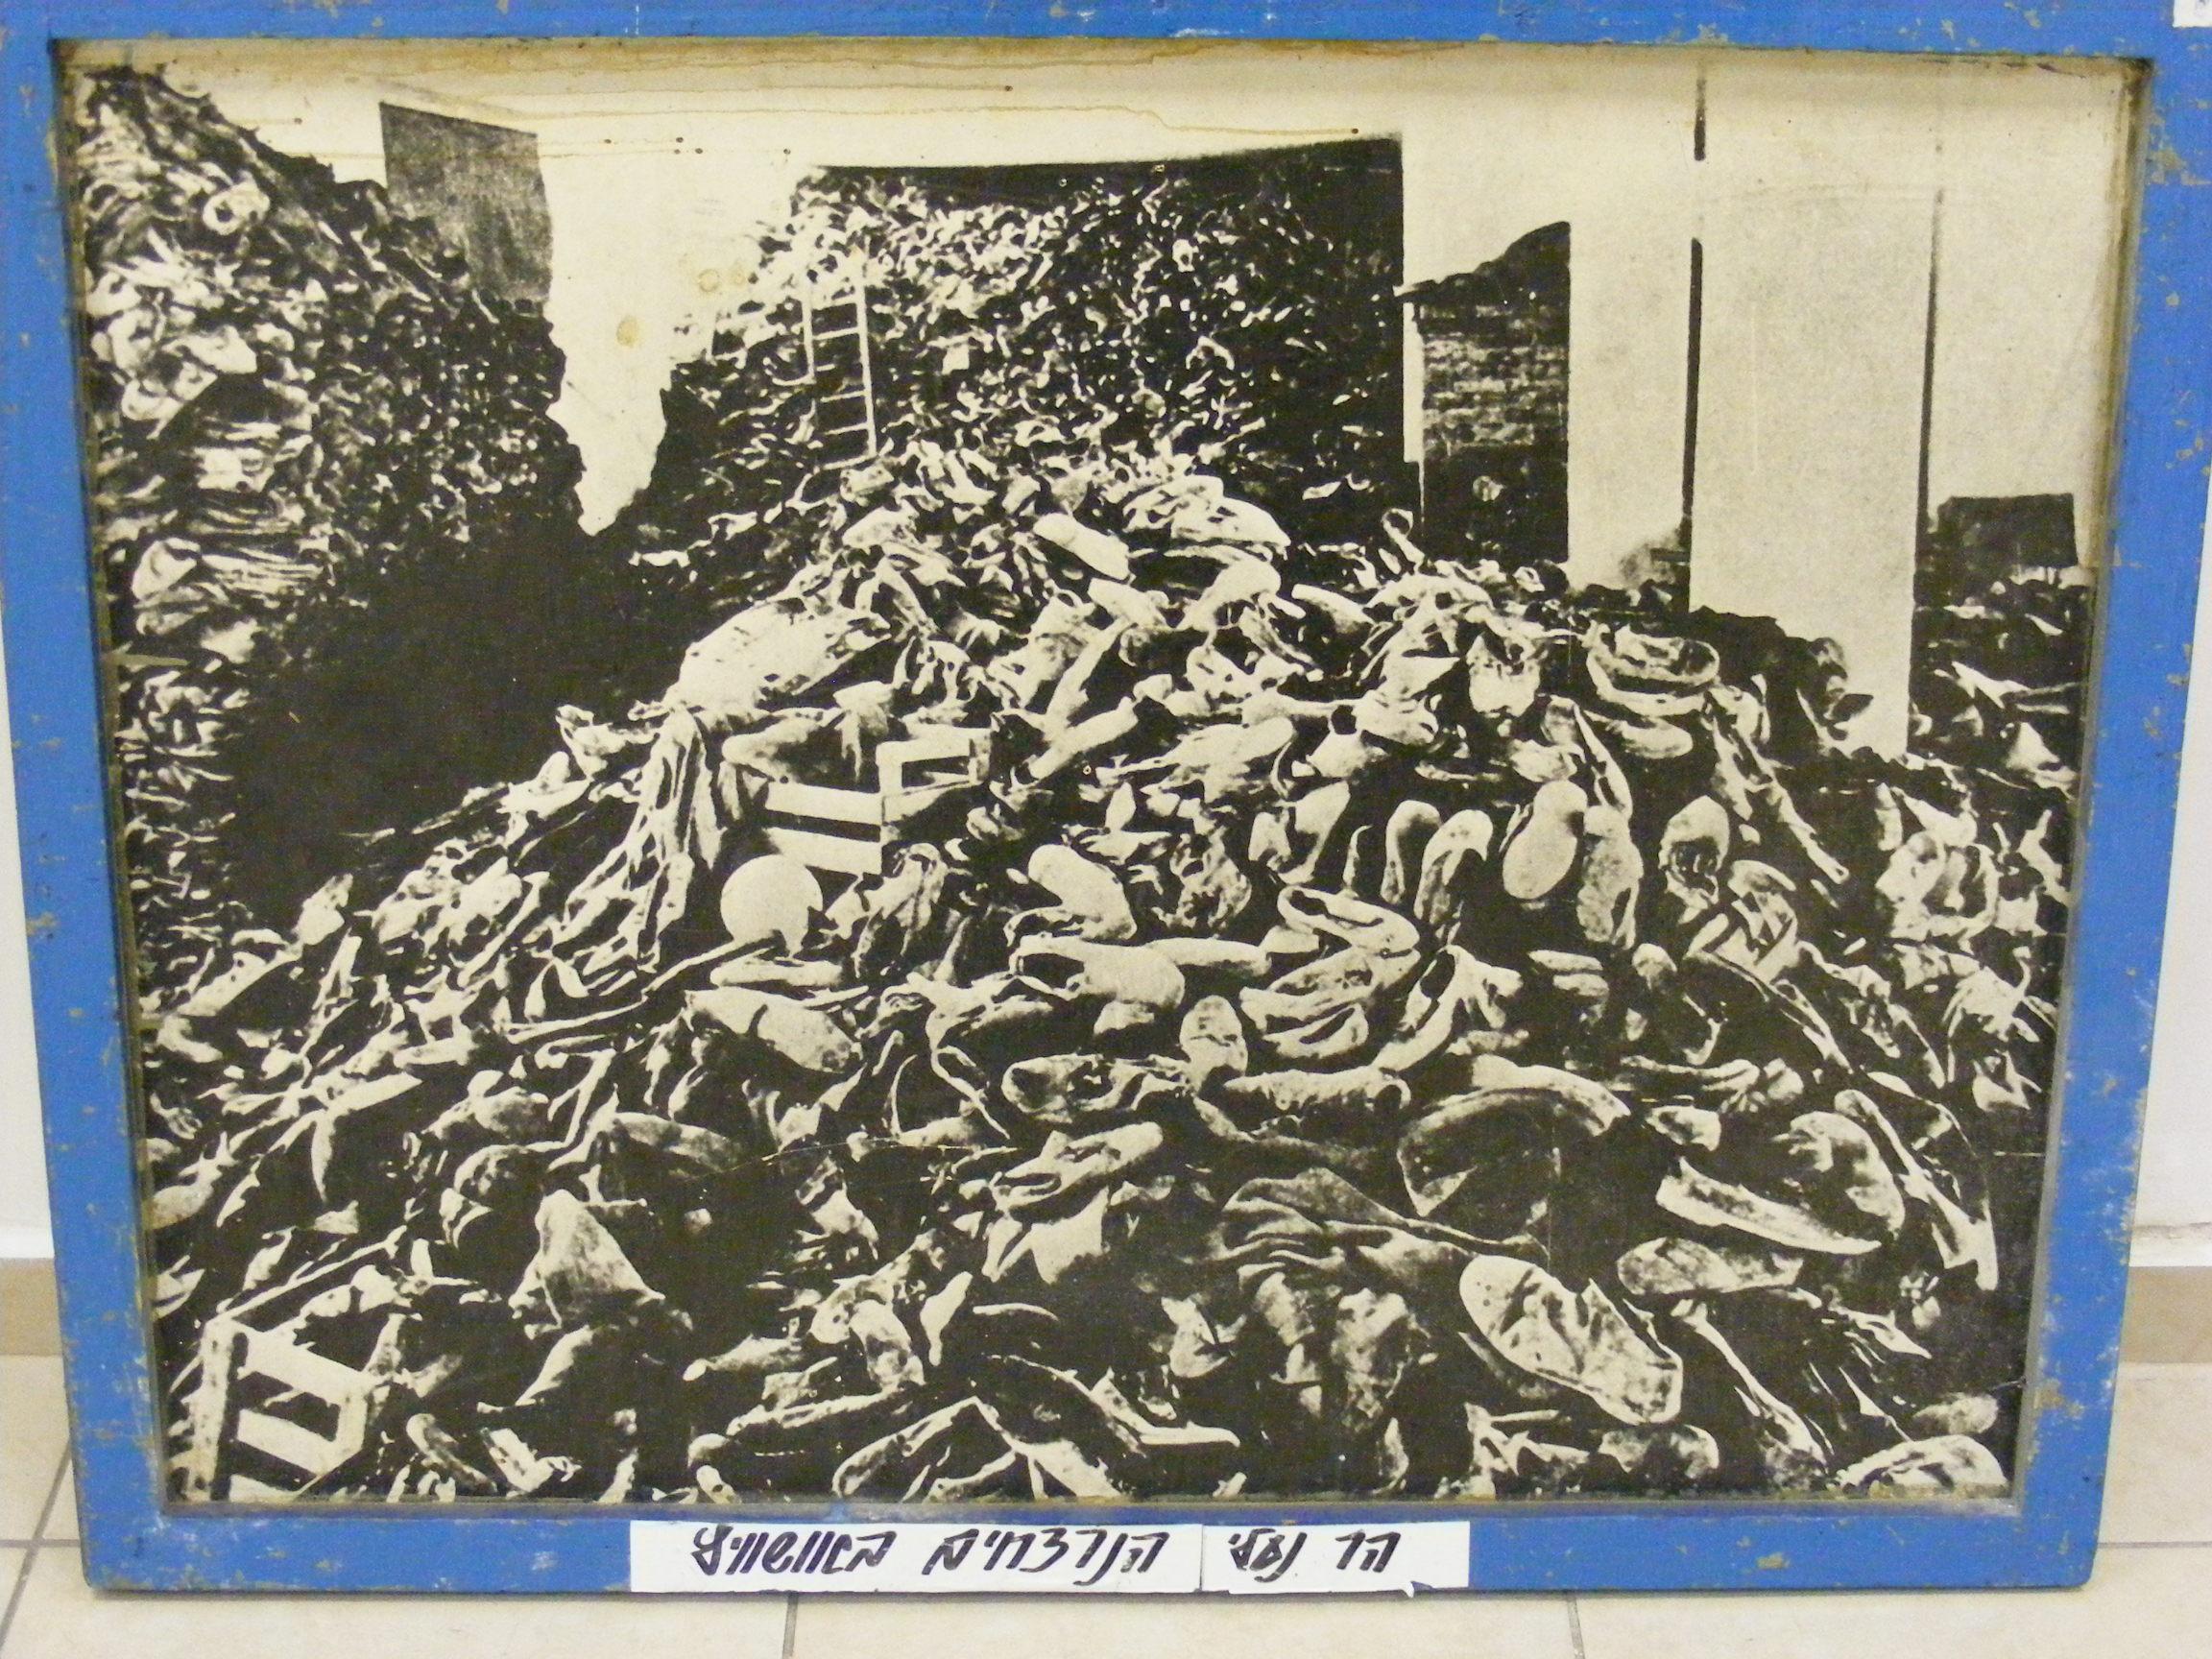 The mountain of the shoes of the murdered in Auschwitz